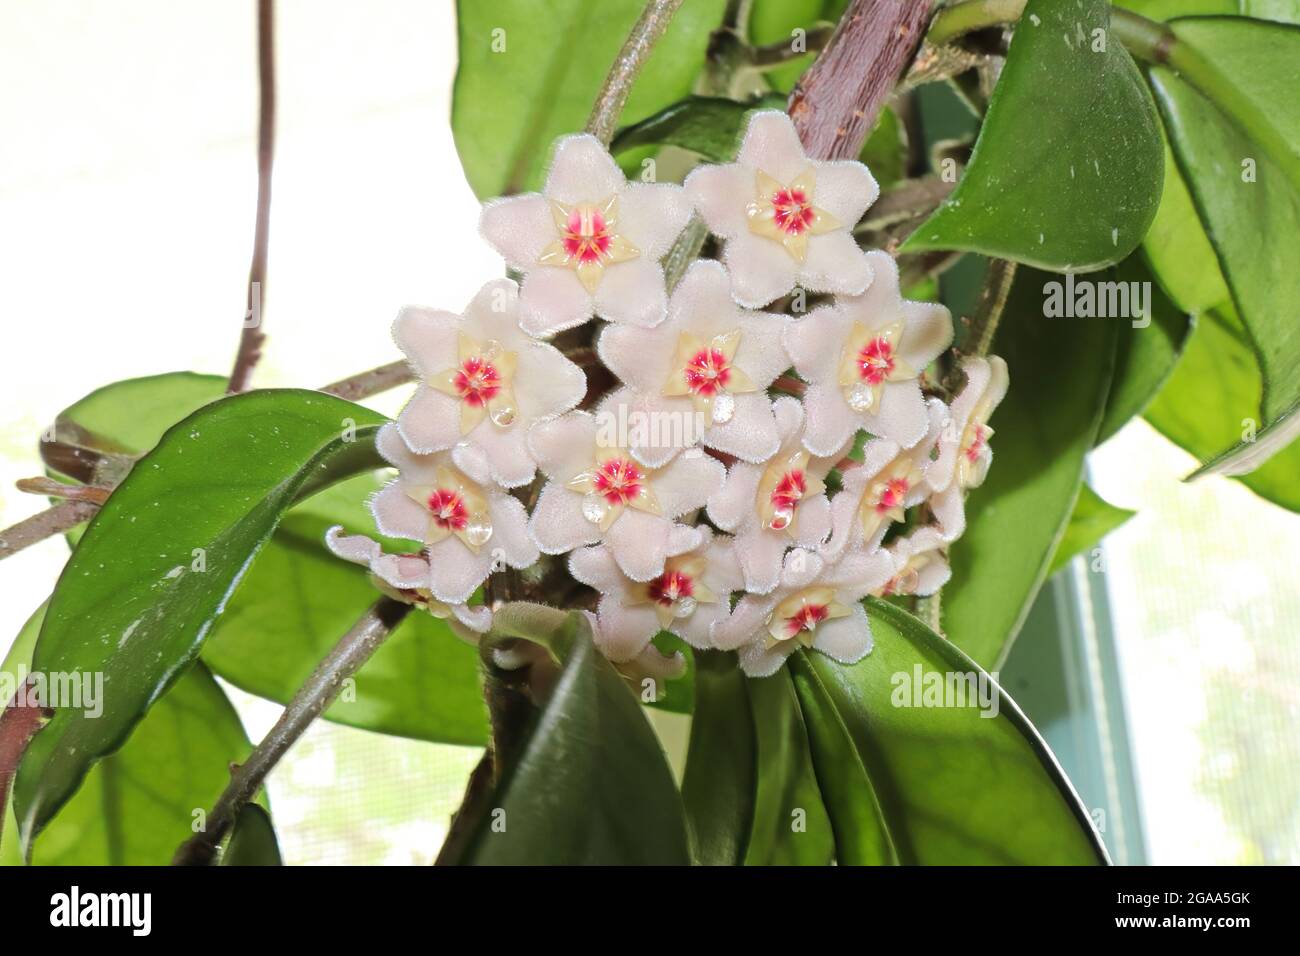 A cluster of hoya flowers against a white background Stock Photo